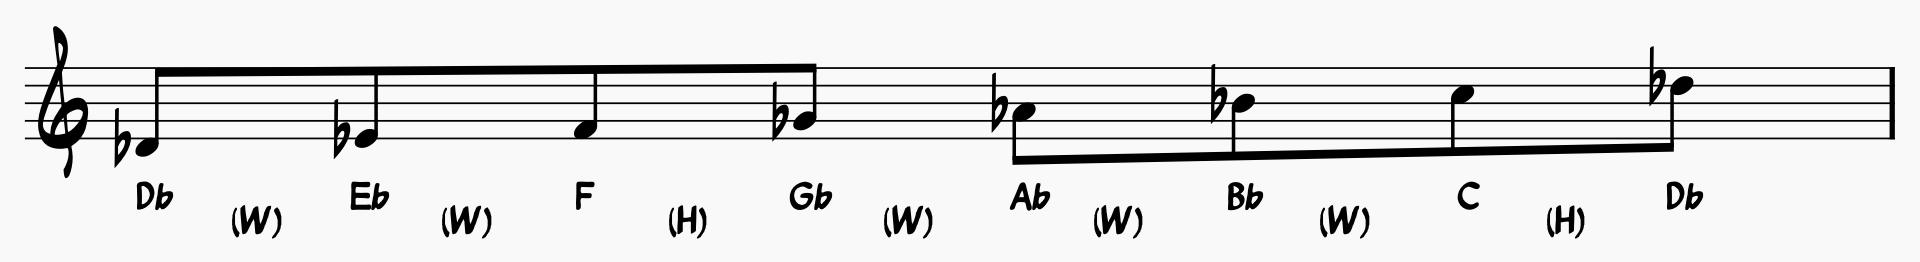 D Flat Major Scale notated with whole steps and half steps